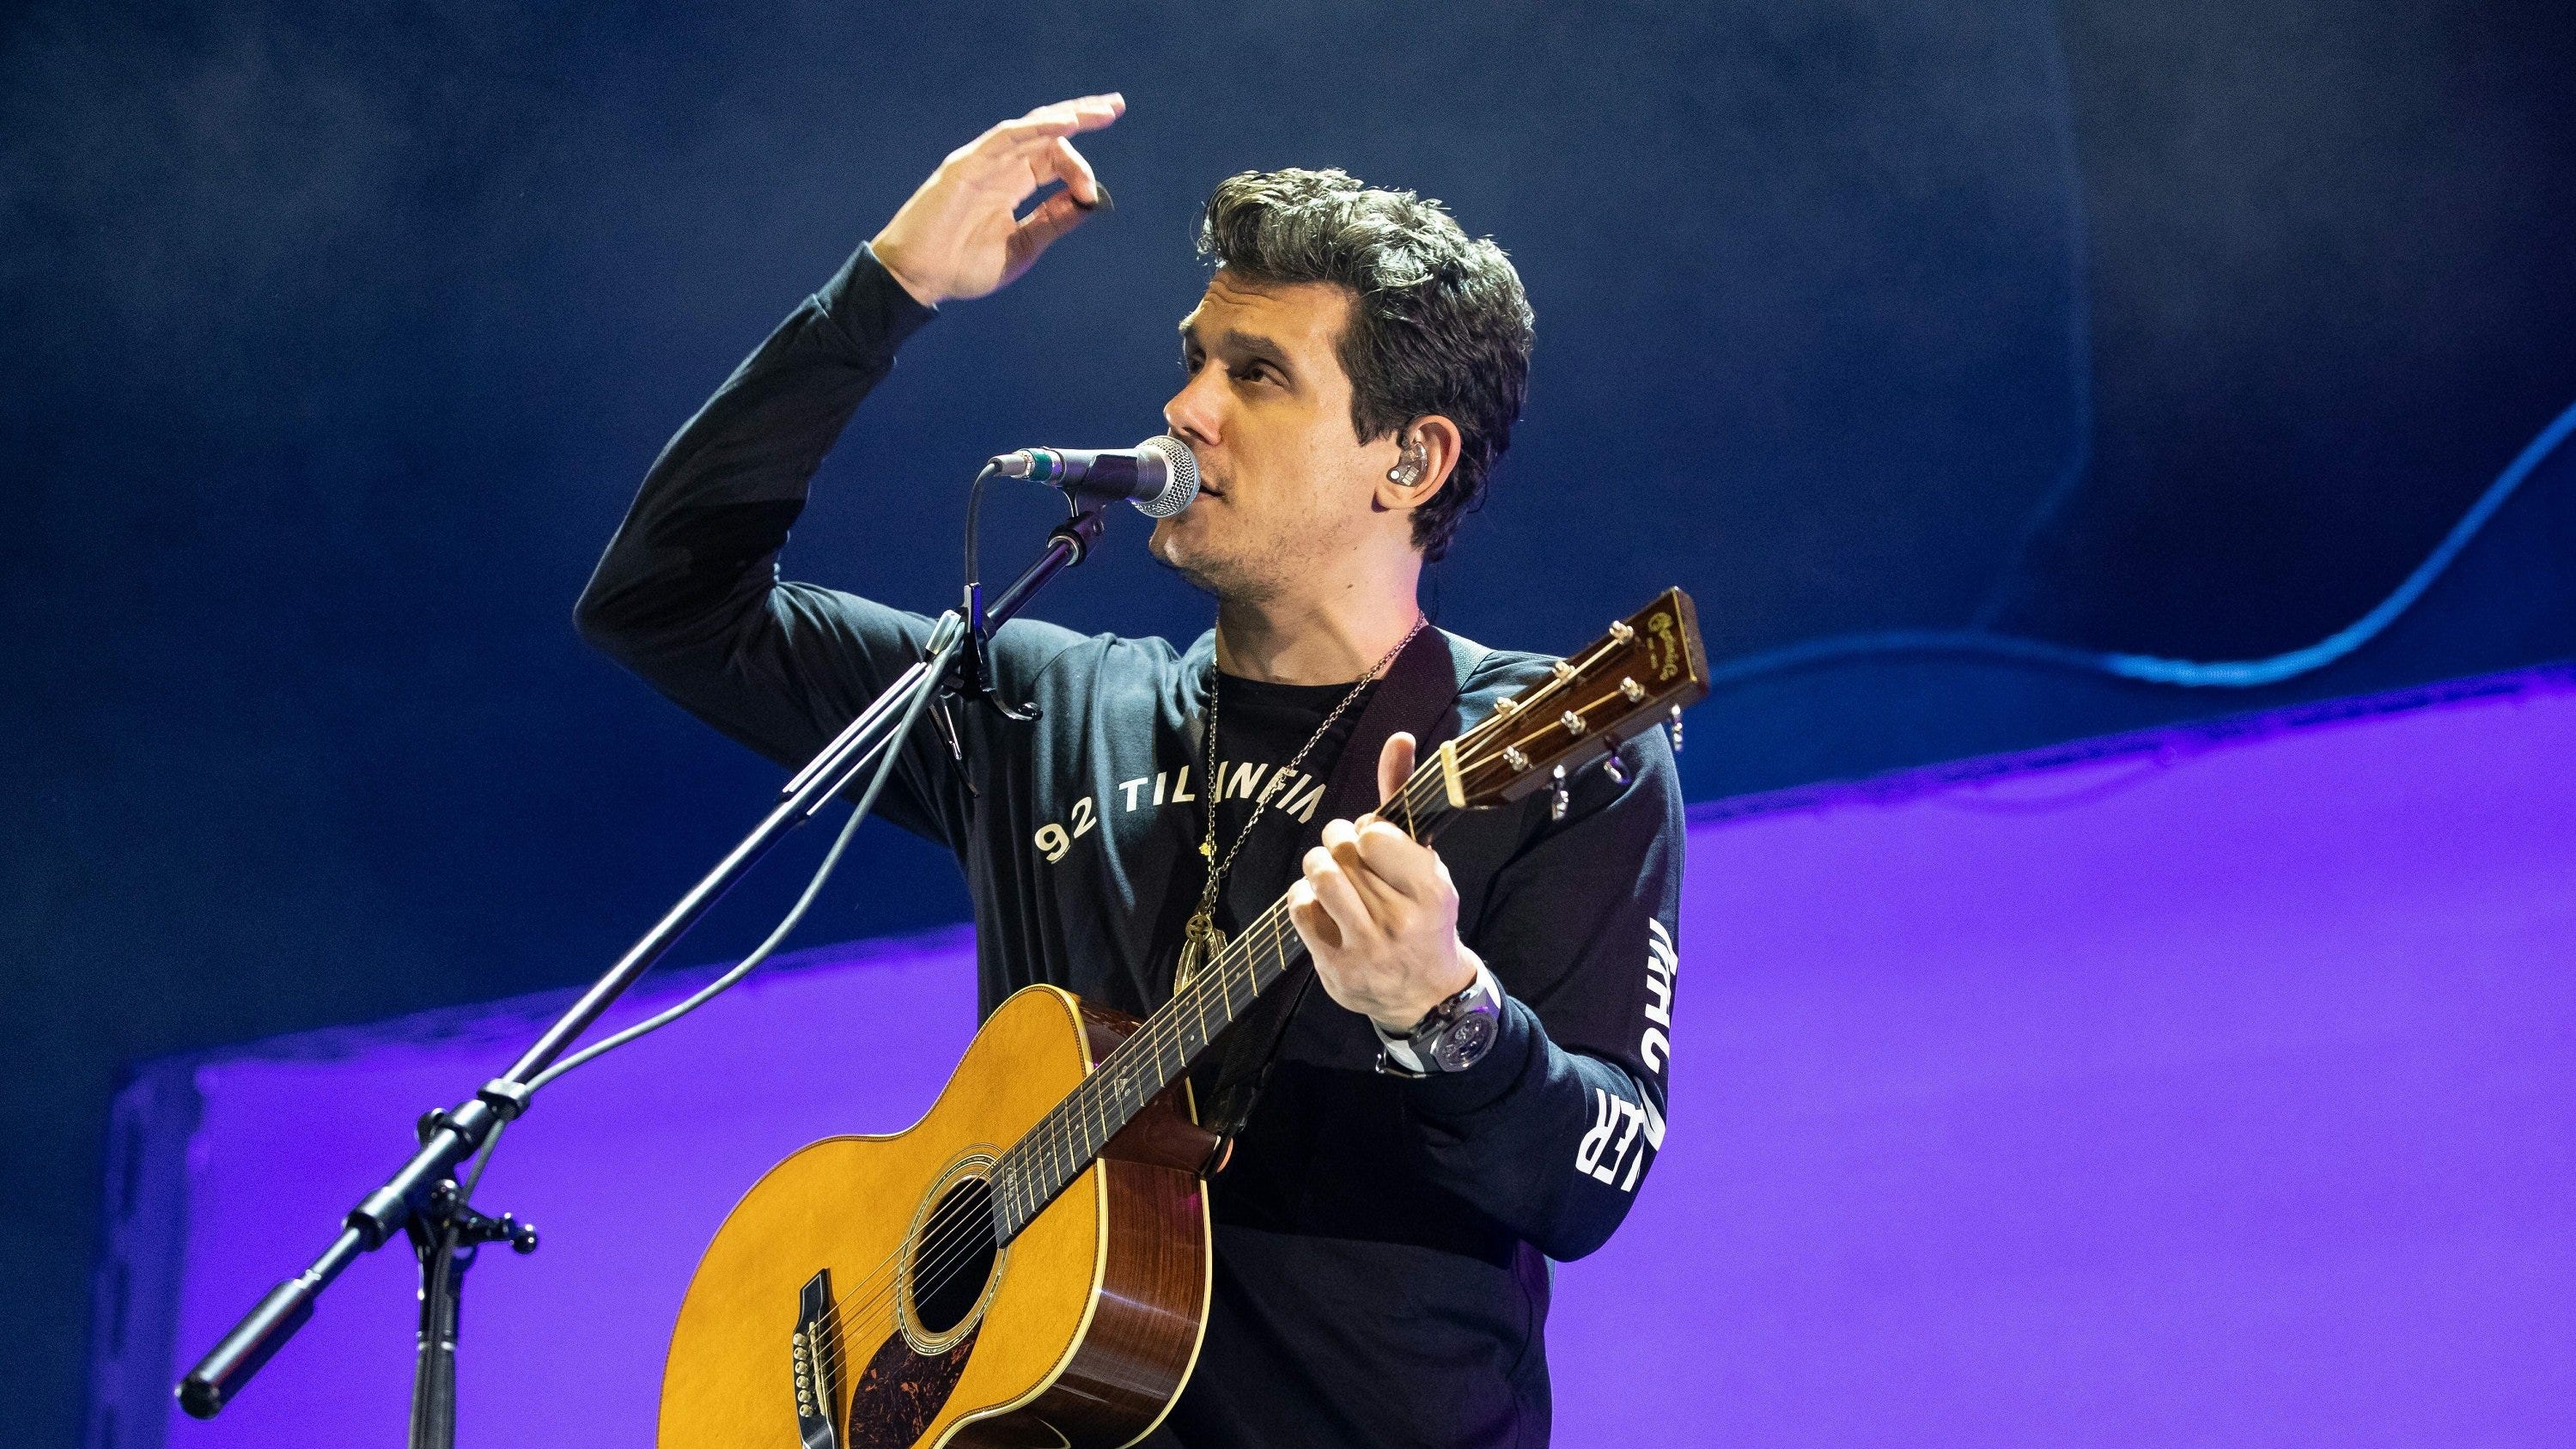 Concerts in Austin John Mayer at Moody Center, J Balvin, Wolf Alice